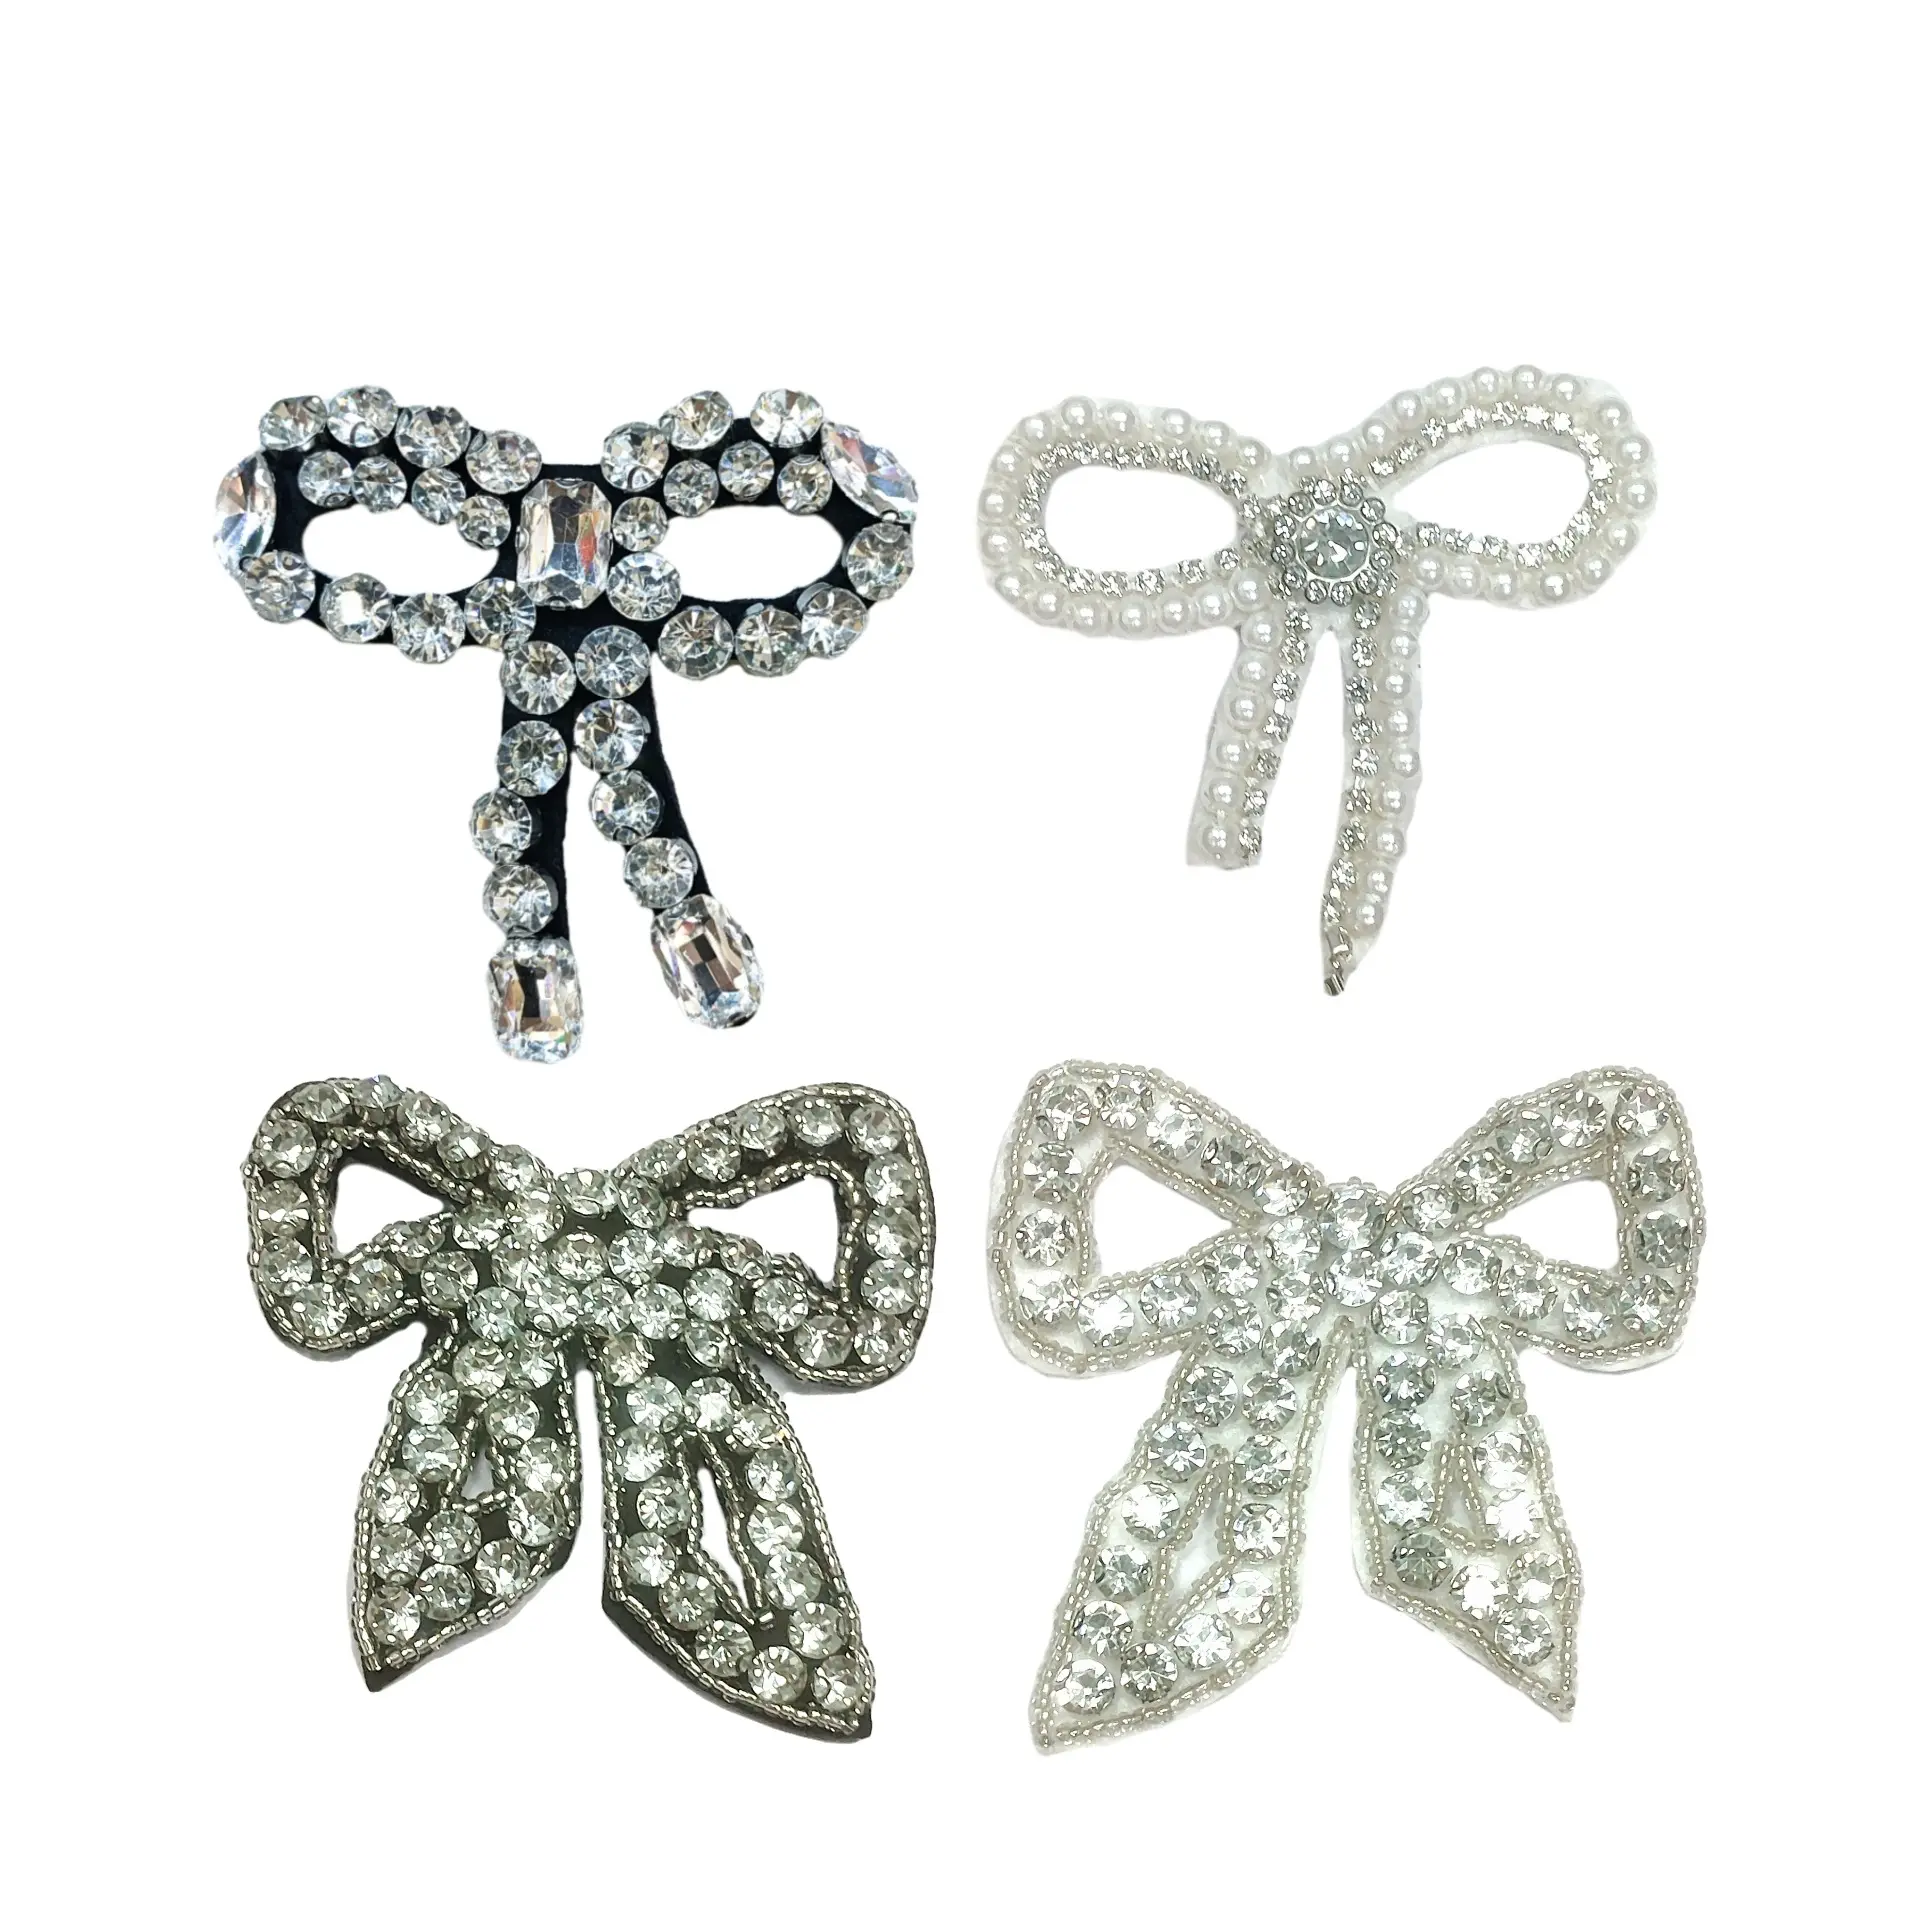 Hot Selling Rhinestone Patch Exquisite Beaded Bow Patch Fashionable Women's Belt Shoes Bags and Clothes Decoration Accessories